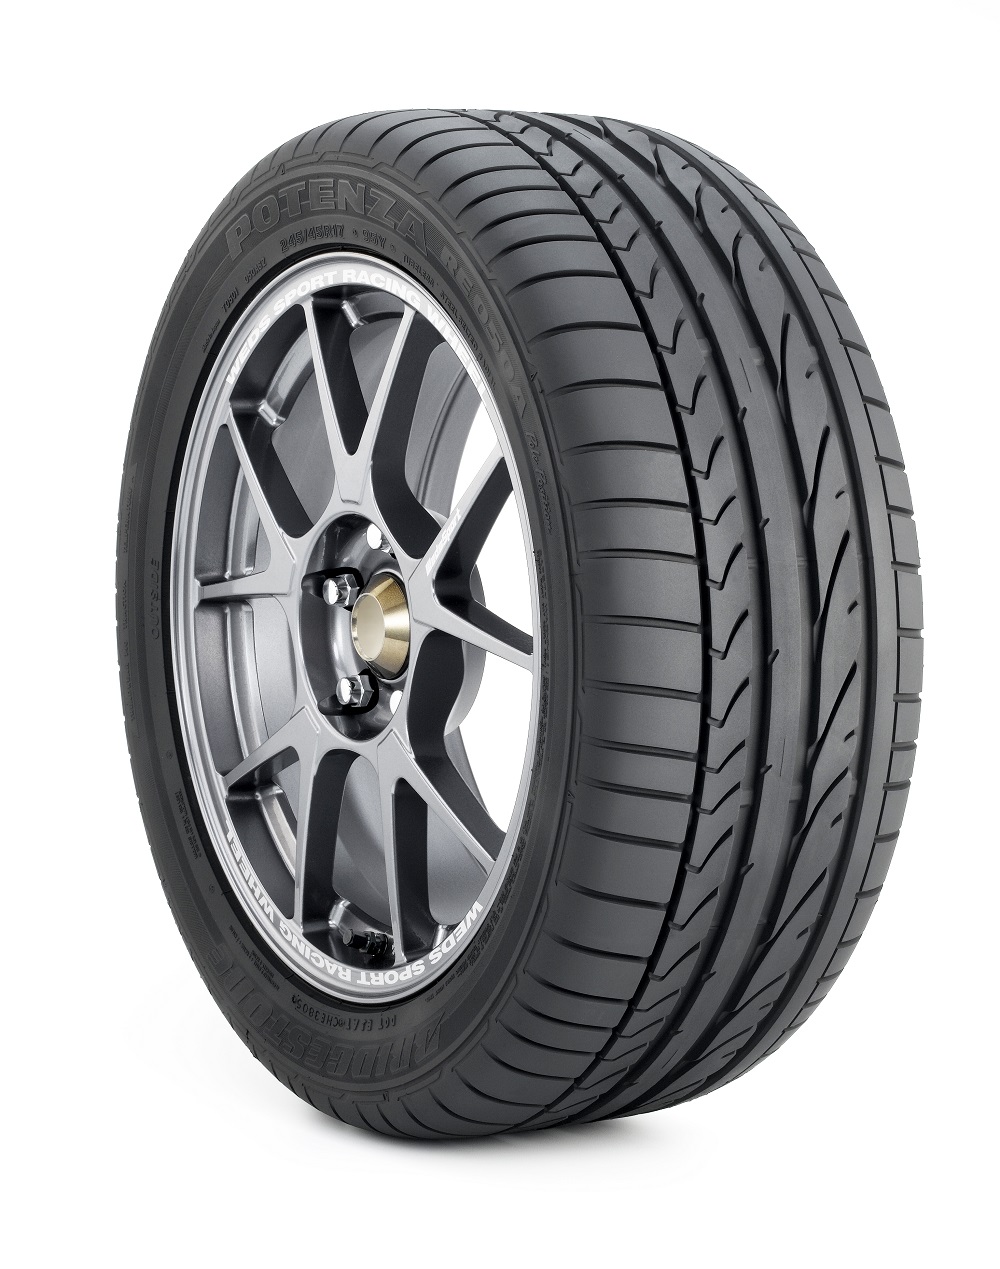 Product Image 1 of 1. Potenza RE050A Pole Position RFT